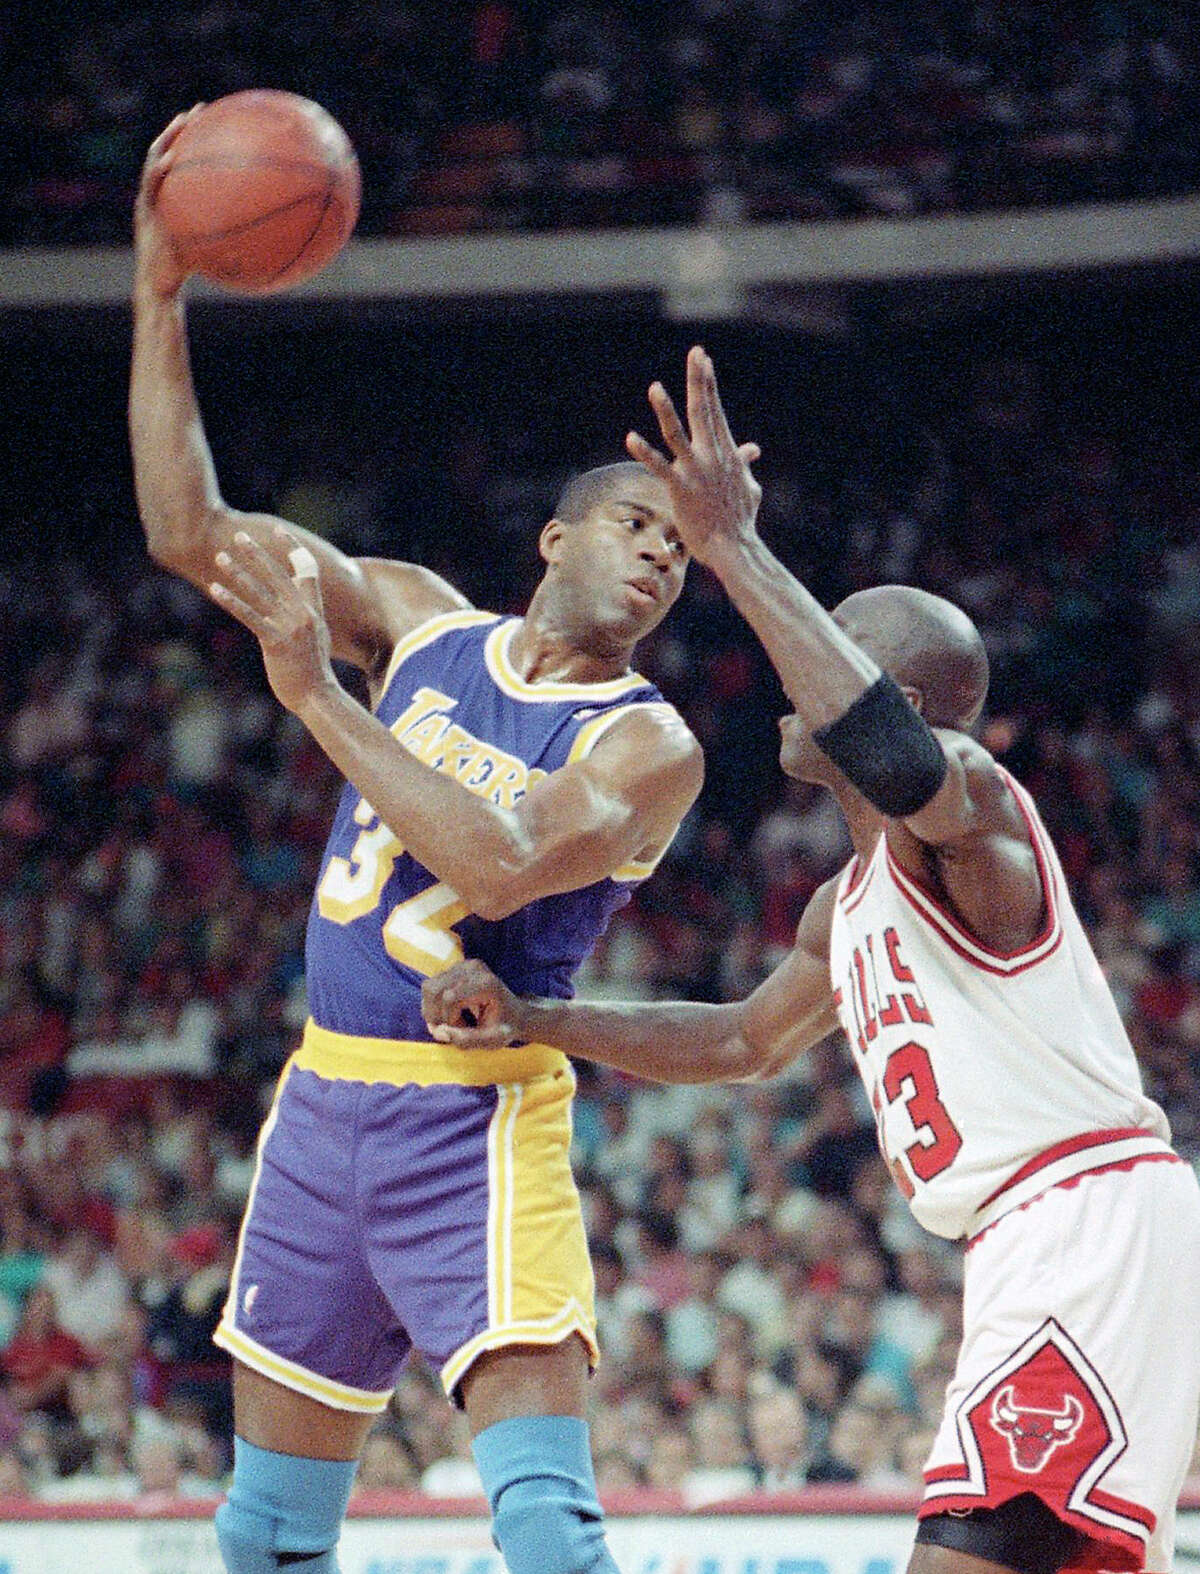 FILE - In this June 3, 1991, file photo, Los Angeles Lakers guard Magic Johnson looks to pass against Chicago Bulls' Michael Jordan during the first quarter in Game 1 of the NBA Finals in Chicago. From 1957 to 1990, the trio of Bob Cousy, Magic Johnson and Isiah Thomas combined for 13 NBA titles. They were all capable scorers, but more often than not beat opponents by setting up teammates. (AP Photo/Fred Jewell, File)